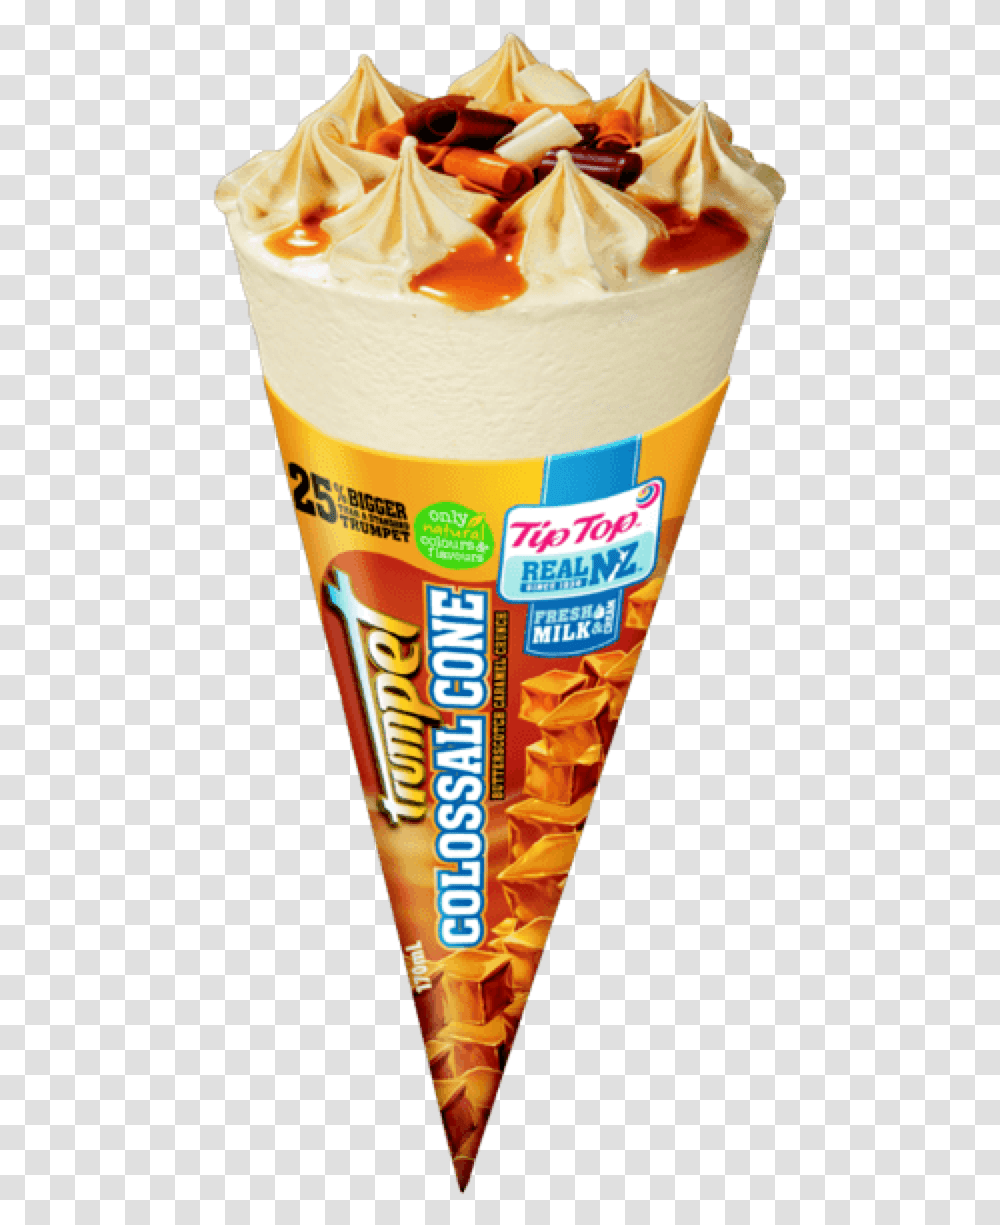 Cone Colossal Cone Butterscotch Caramel Crunch2 X 1340 Colossal Trumpet, Paper, Towel, Beer, Alcohol Transparent Png